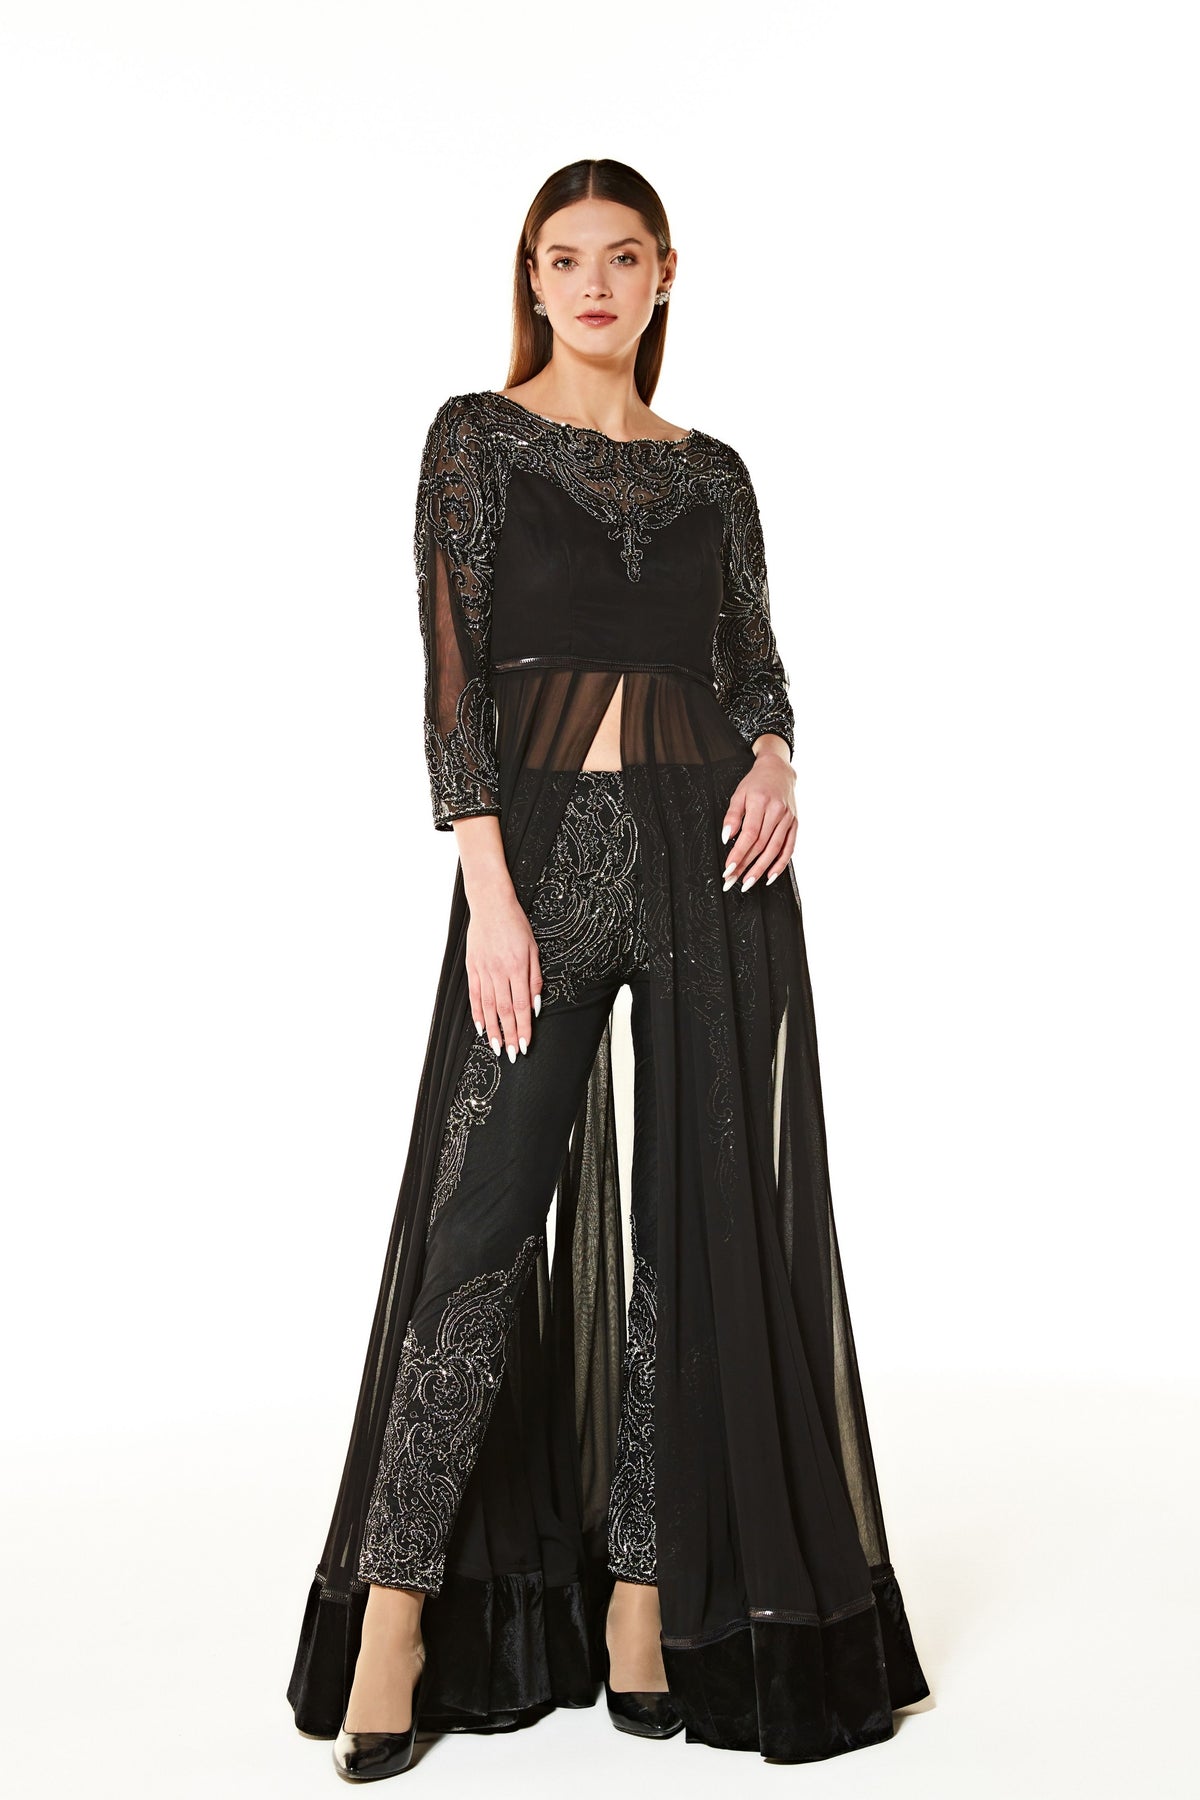 Adah Black Gown With Pant